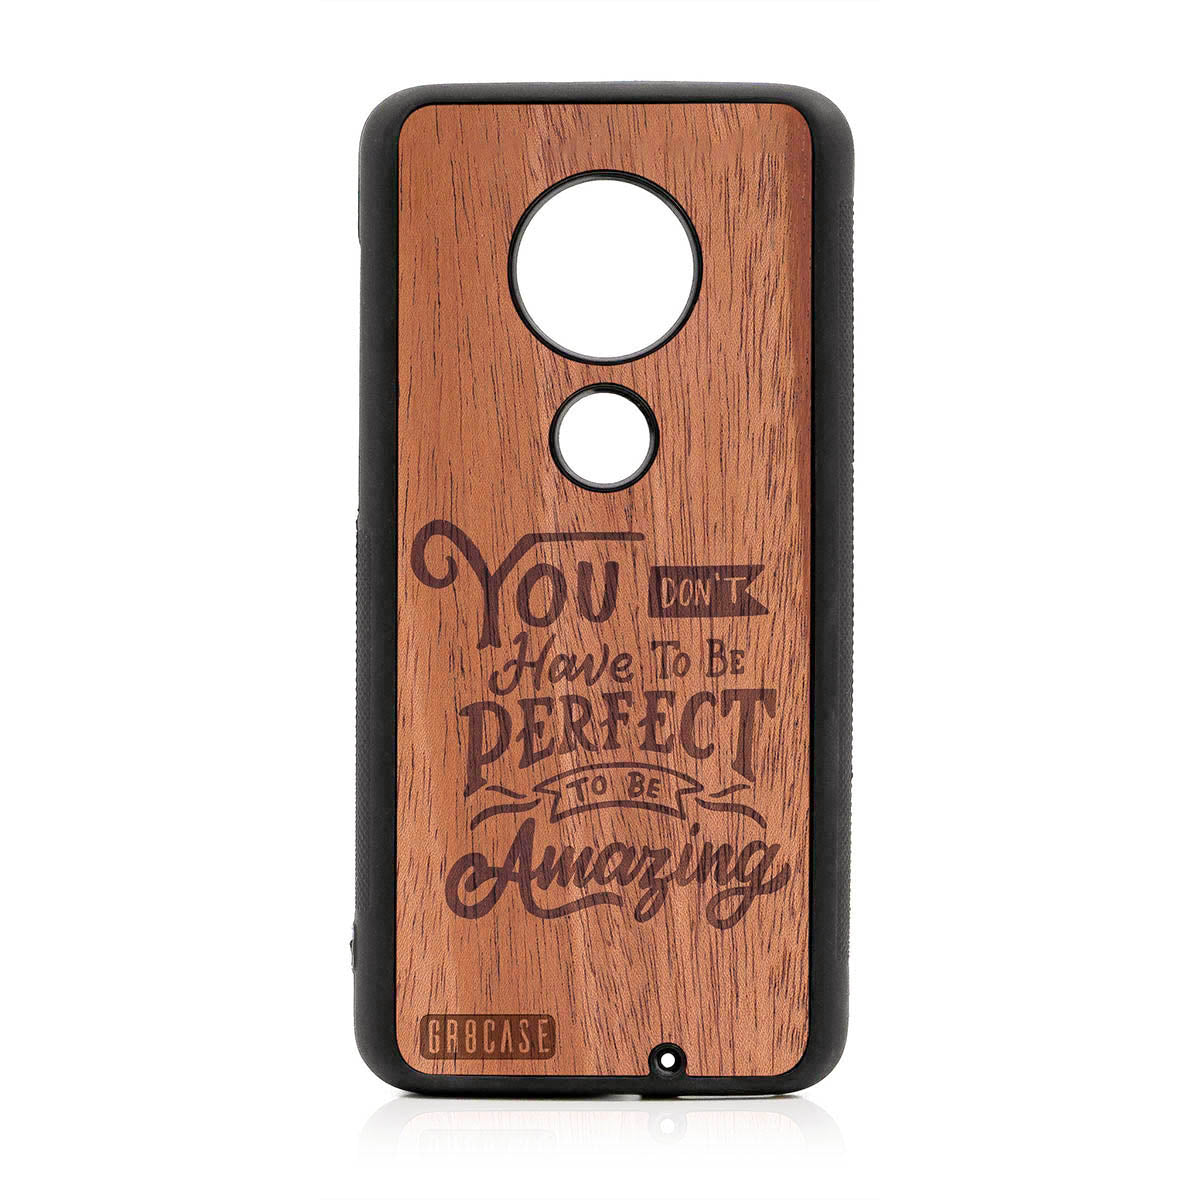 You Don't Have To Be Perfect To Be Amazing Design Wood Case For Moto G7 Plus